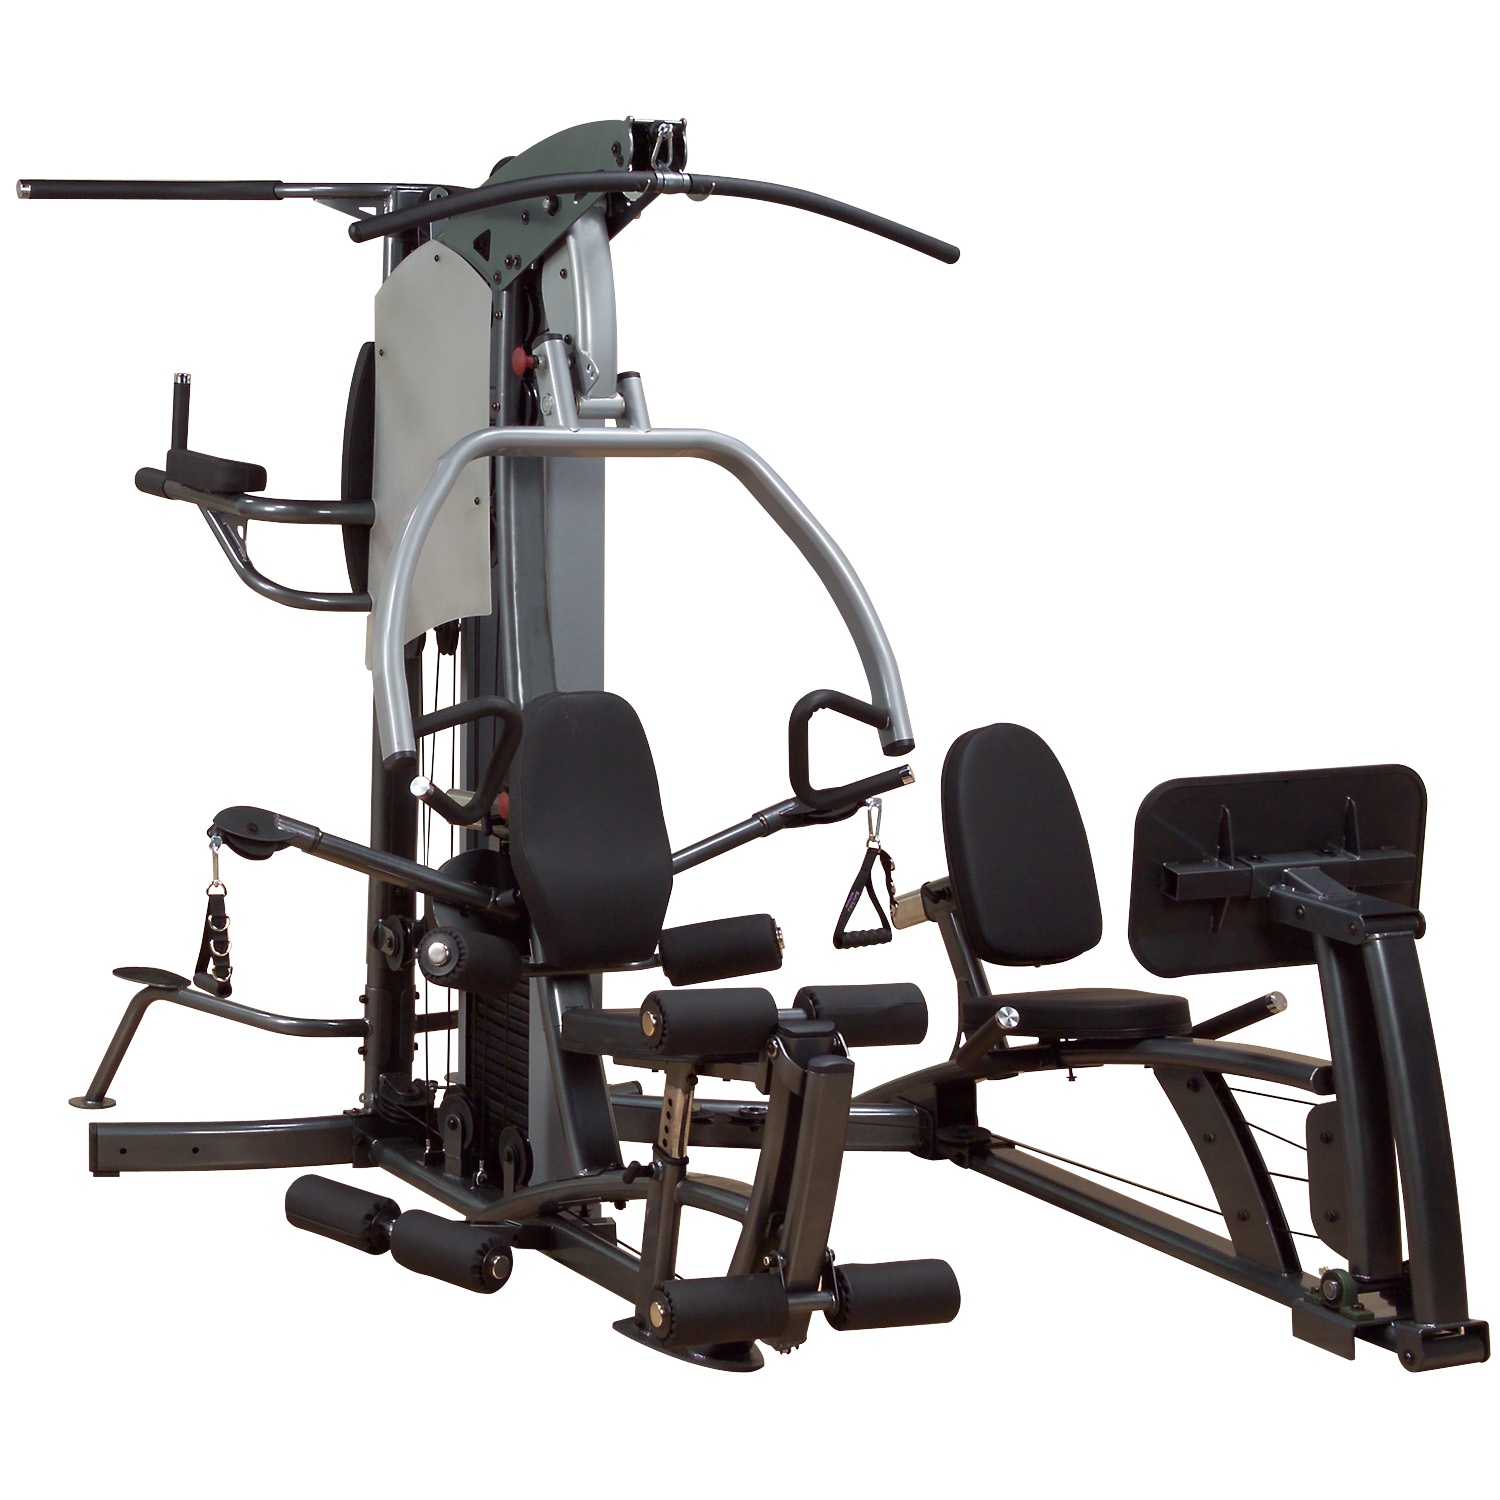 Body-Solid Powerline P2LPX210 Home Gym Equipment with Leg Press, 210 lbs. Weight Stack